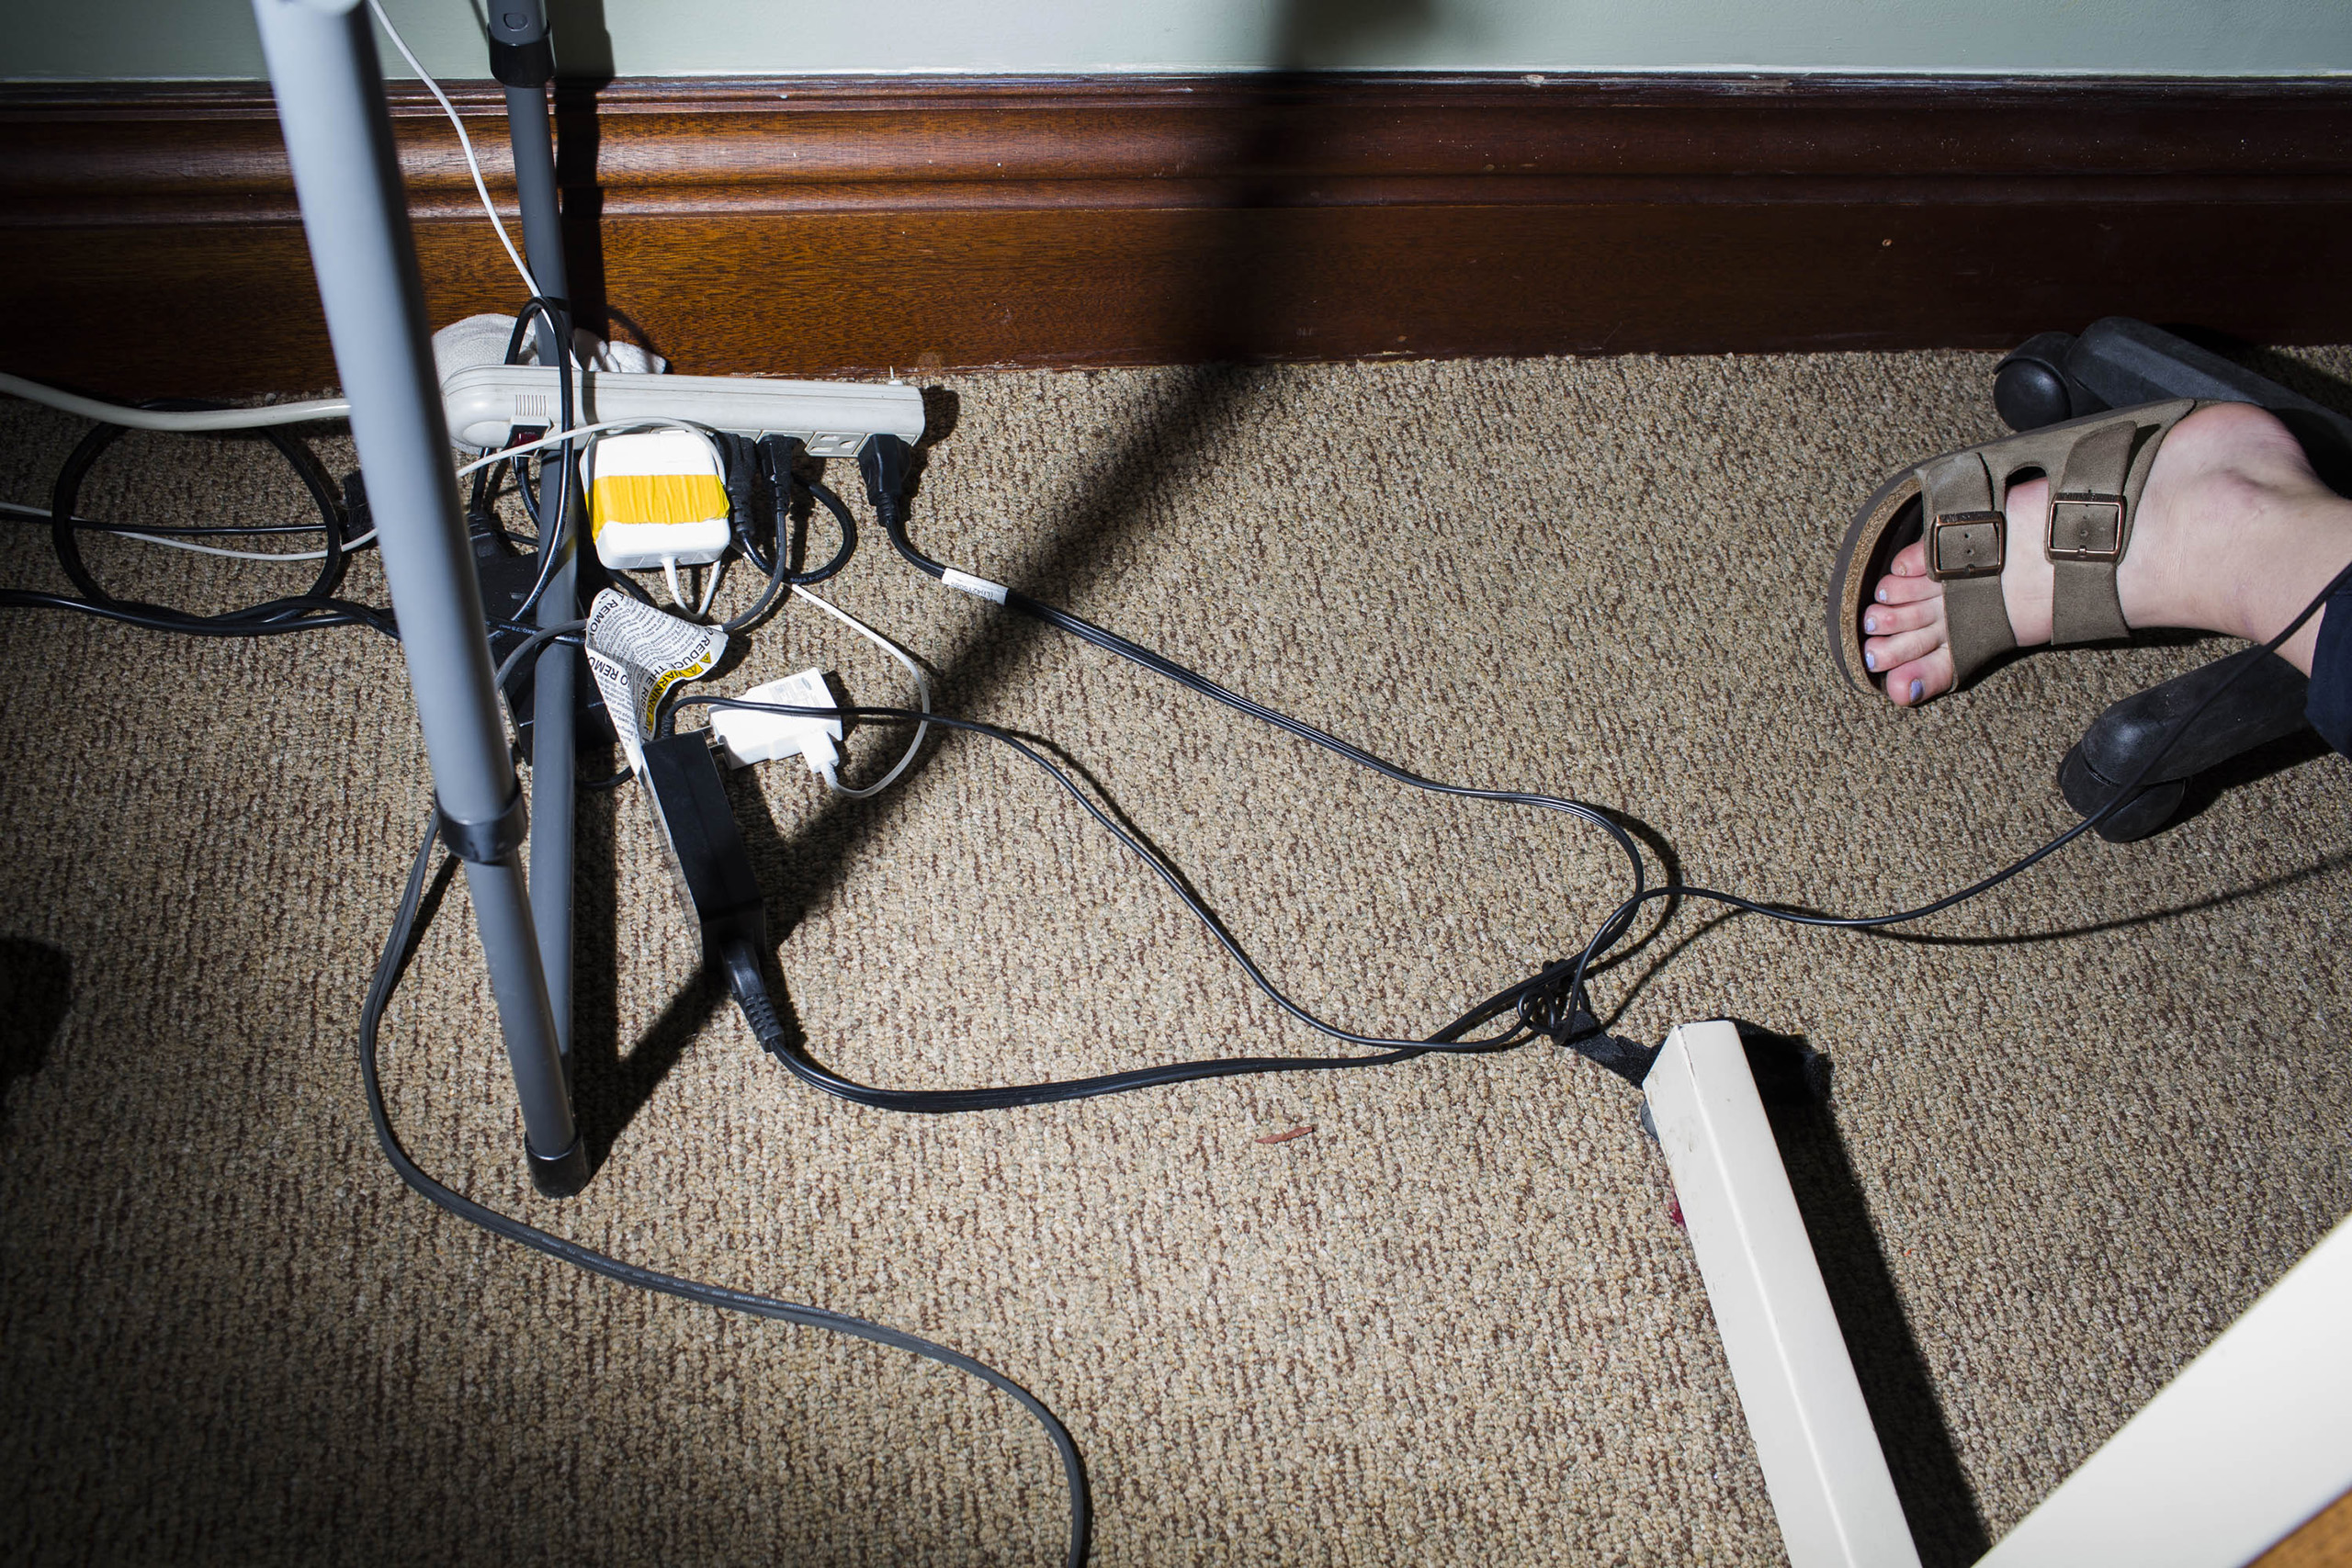 Power cords strewn around to support many of the staff and volunteers inside the campaign headquarters of Bernie Sanders on May 23, 2016, in Burlington, VT.